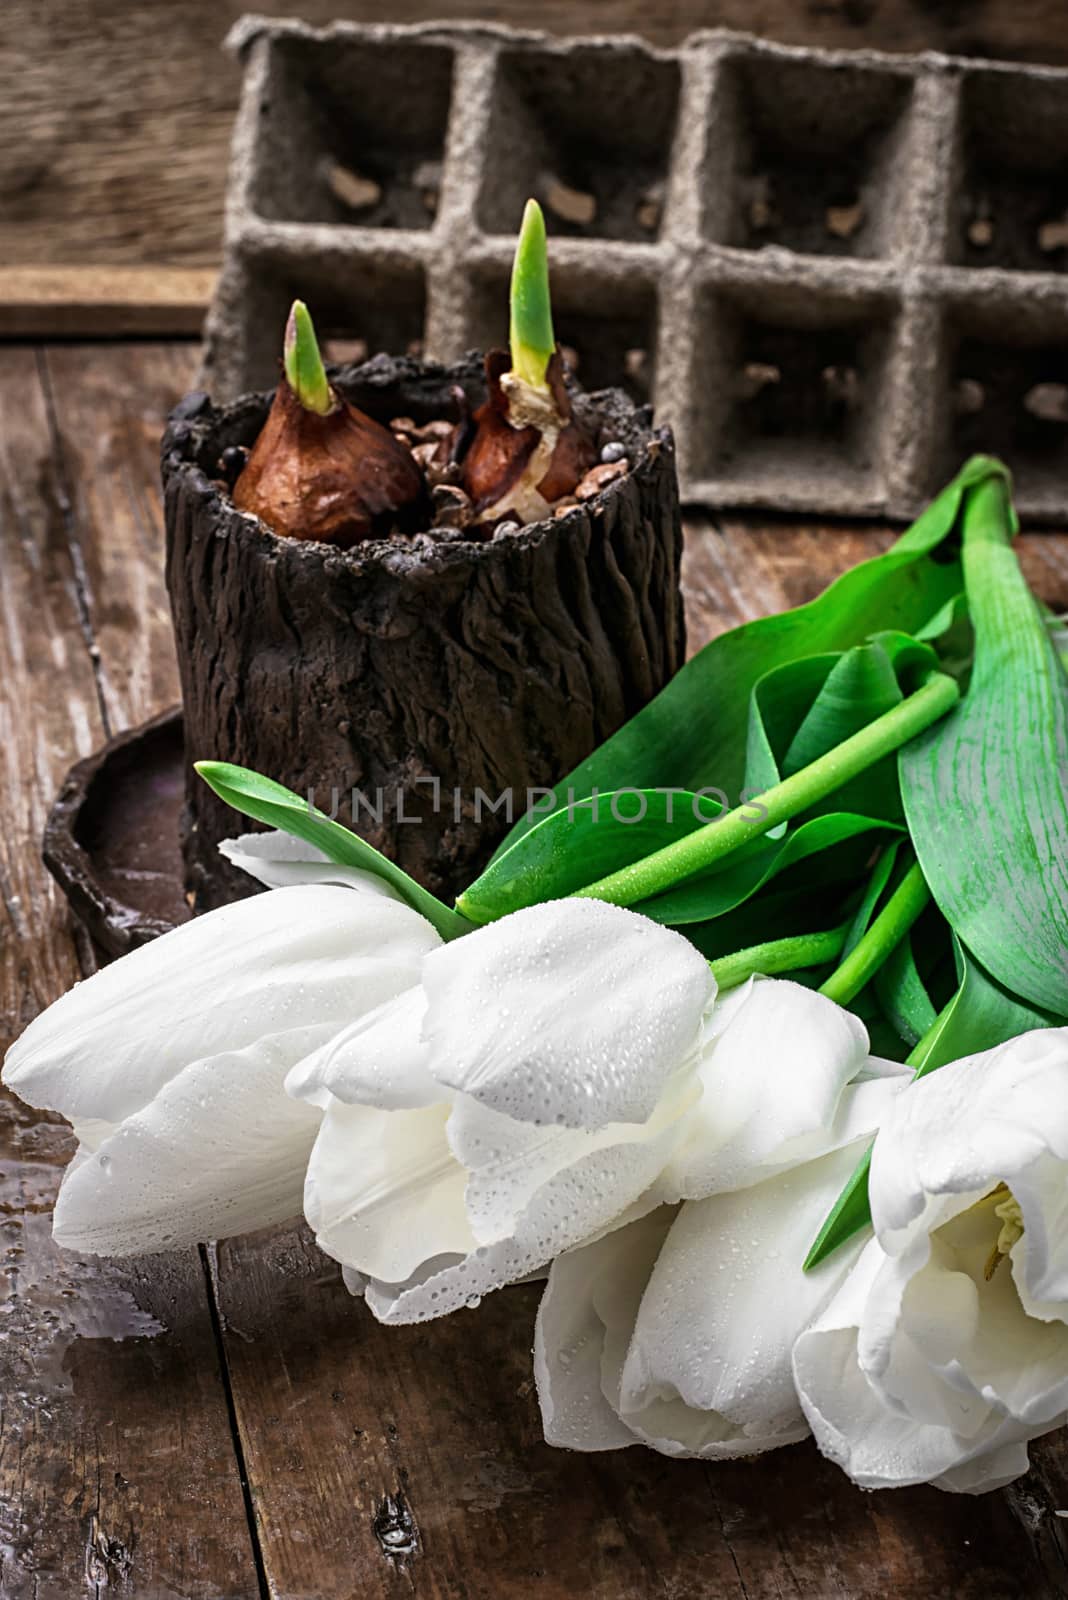 sprouted bulbs tulips by LMykola